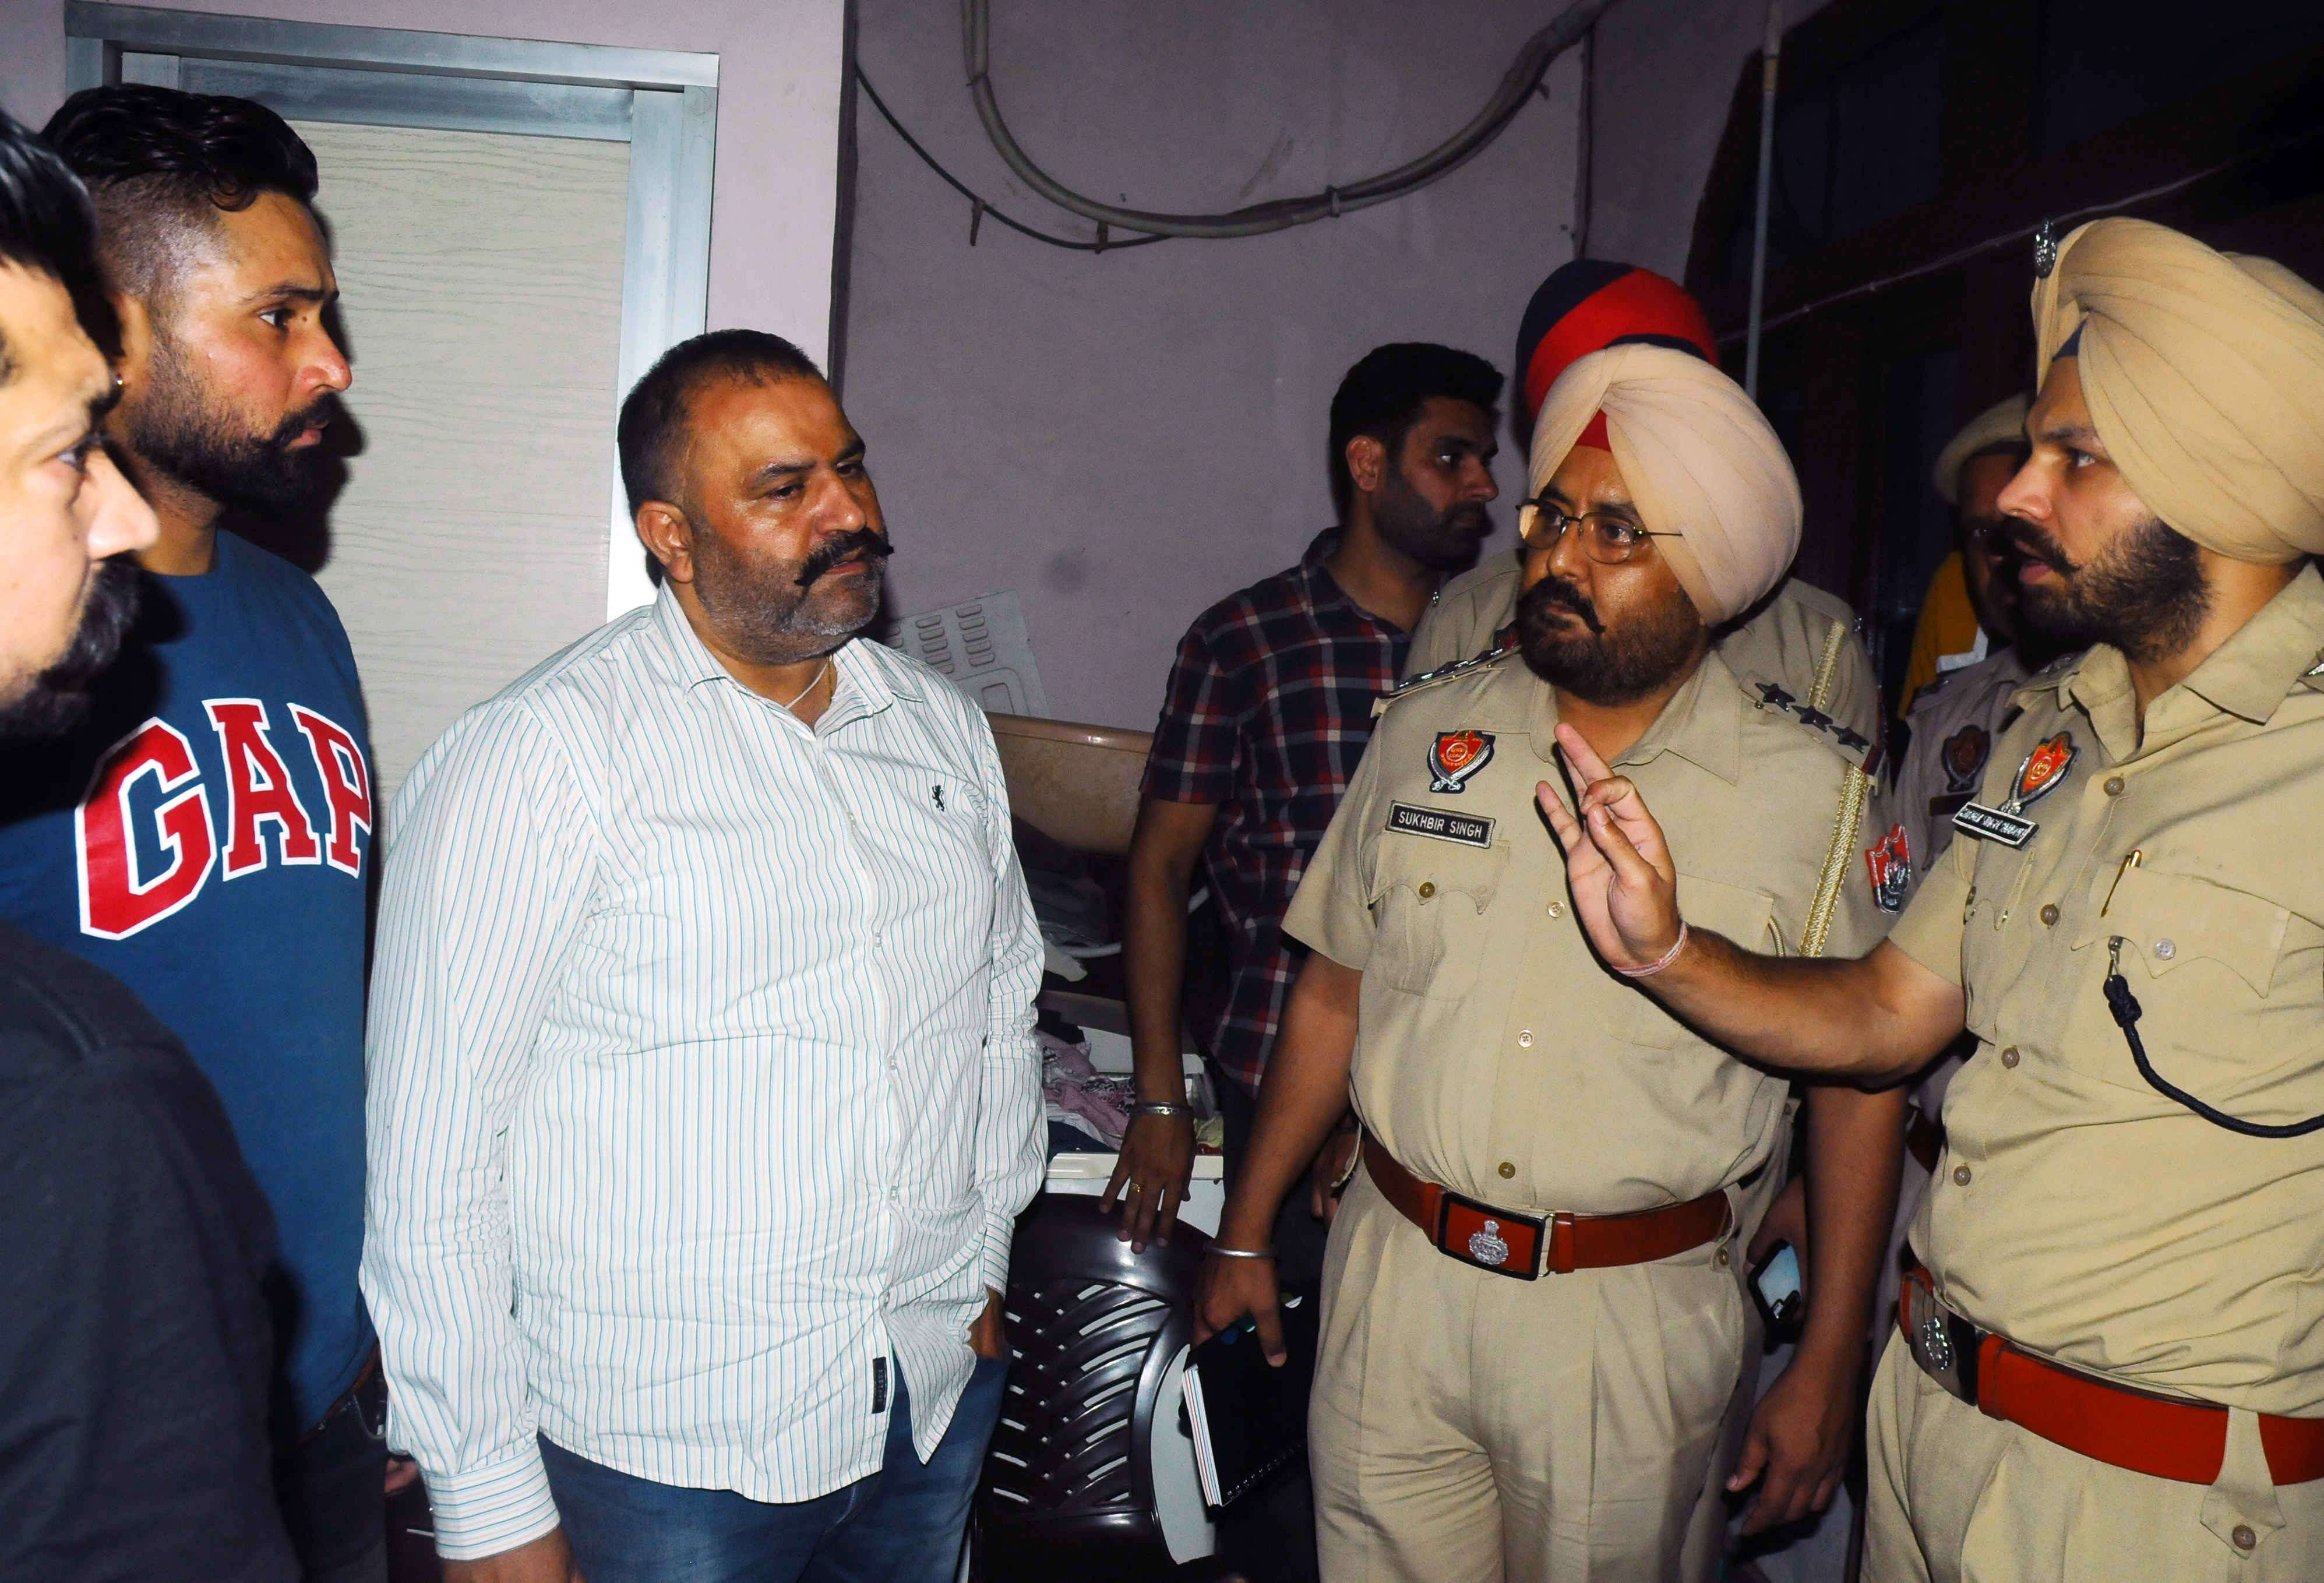 No end to crime: Another firing case reported in Jalandhar West